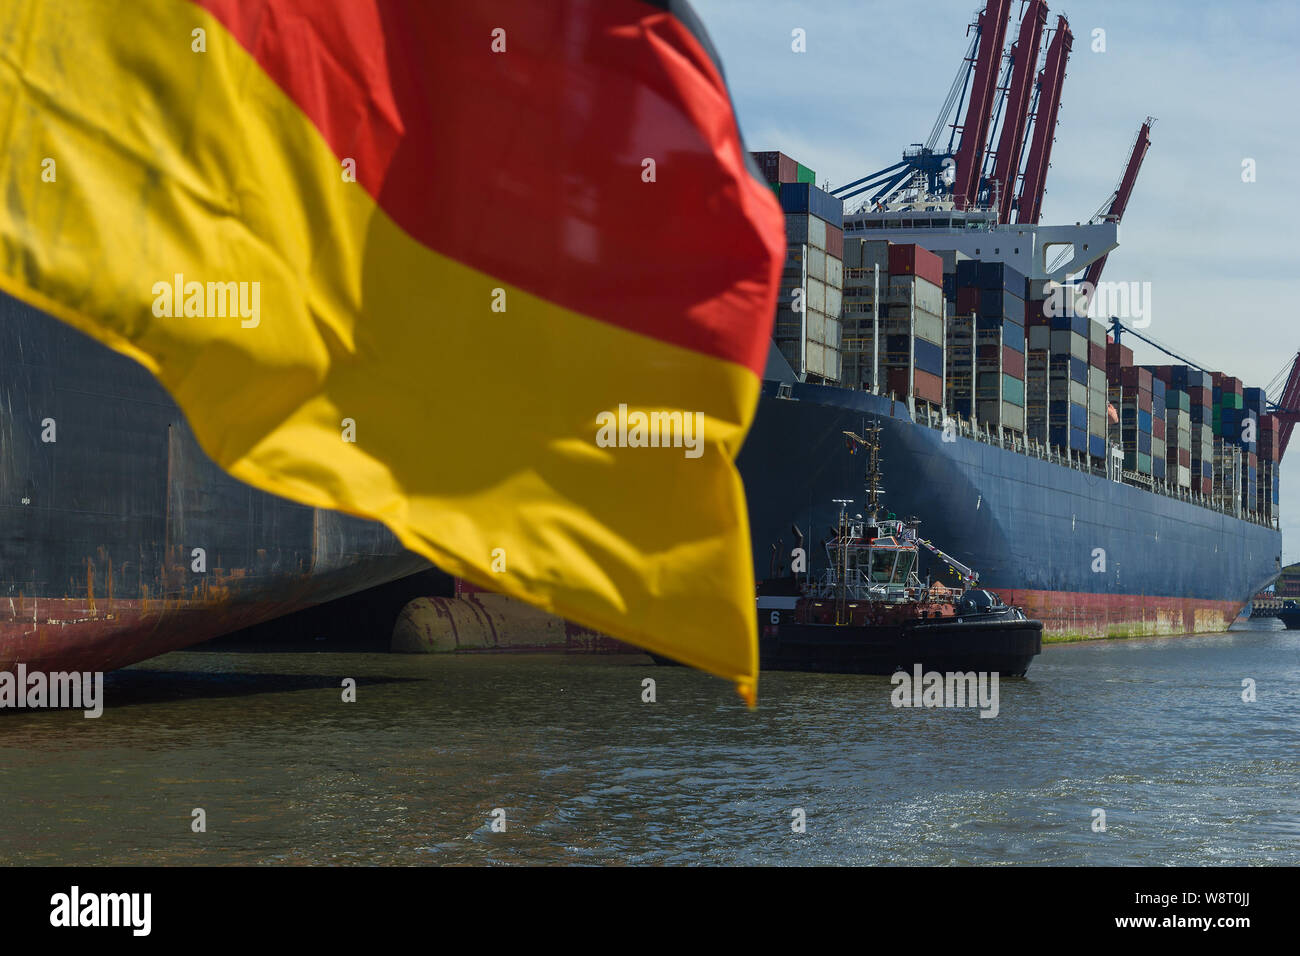 Container ship at container terminal Germany flag export free trade economy Stock Photo